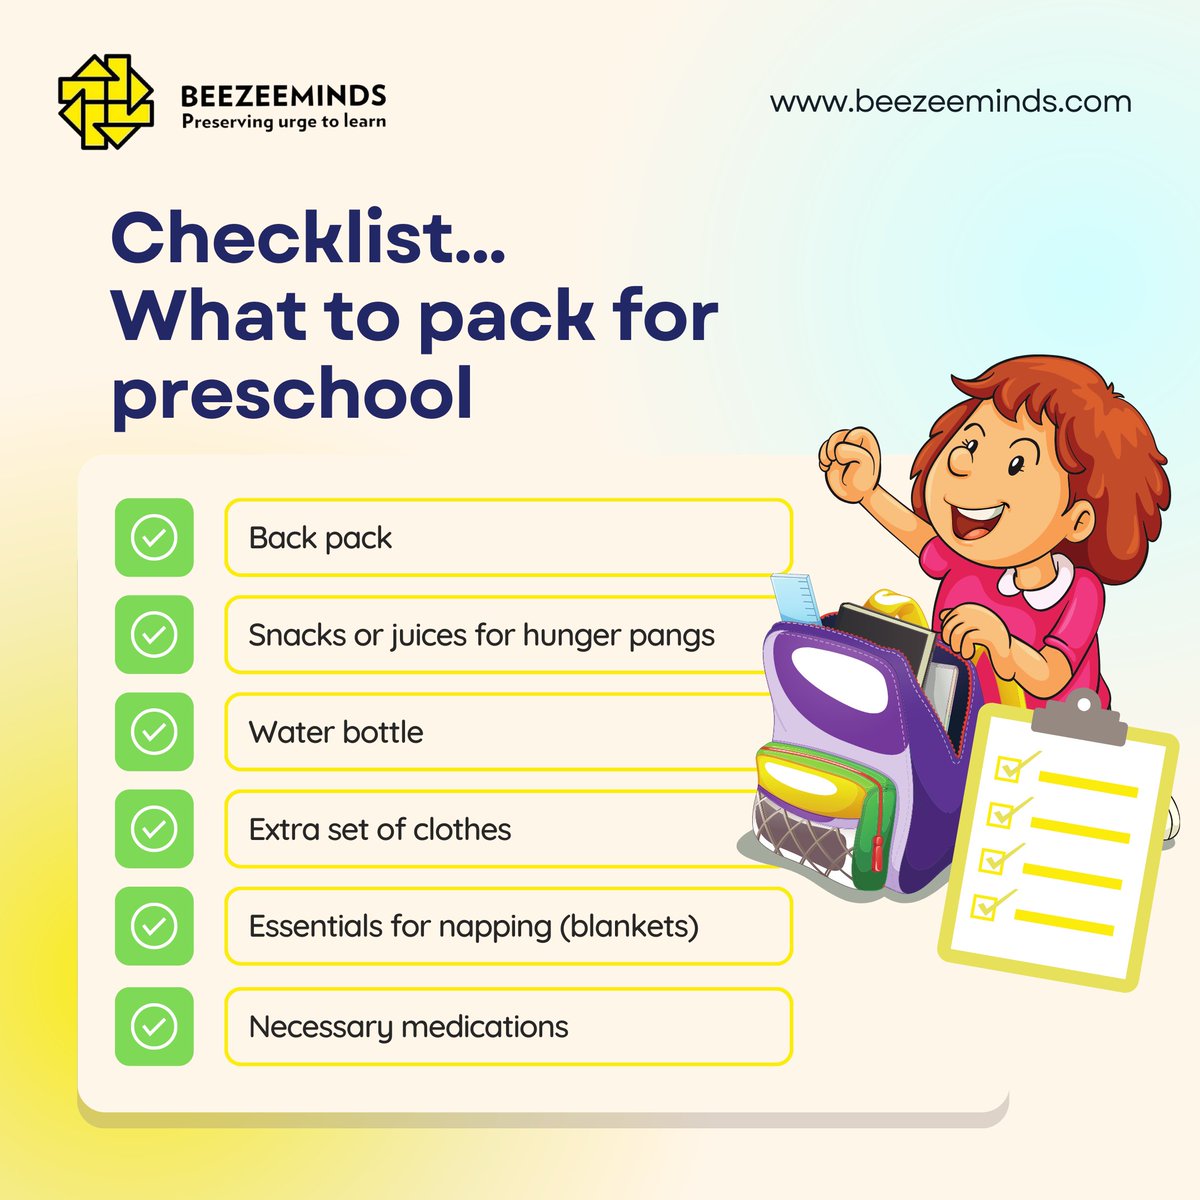 Heading off to preschool?
Make sure you're prepared with our comprehensive packing checklist!

Visit Our Website: beezeeminds.com

#PreschoolPreparation #PreschoolPackingChecklist #PreschoolEssentials #PreschoolLife #PreschoolAdventures #PreschoolLearning #PreschoolFun